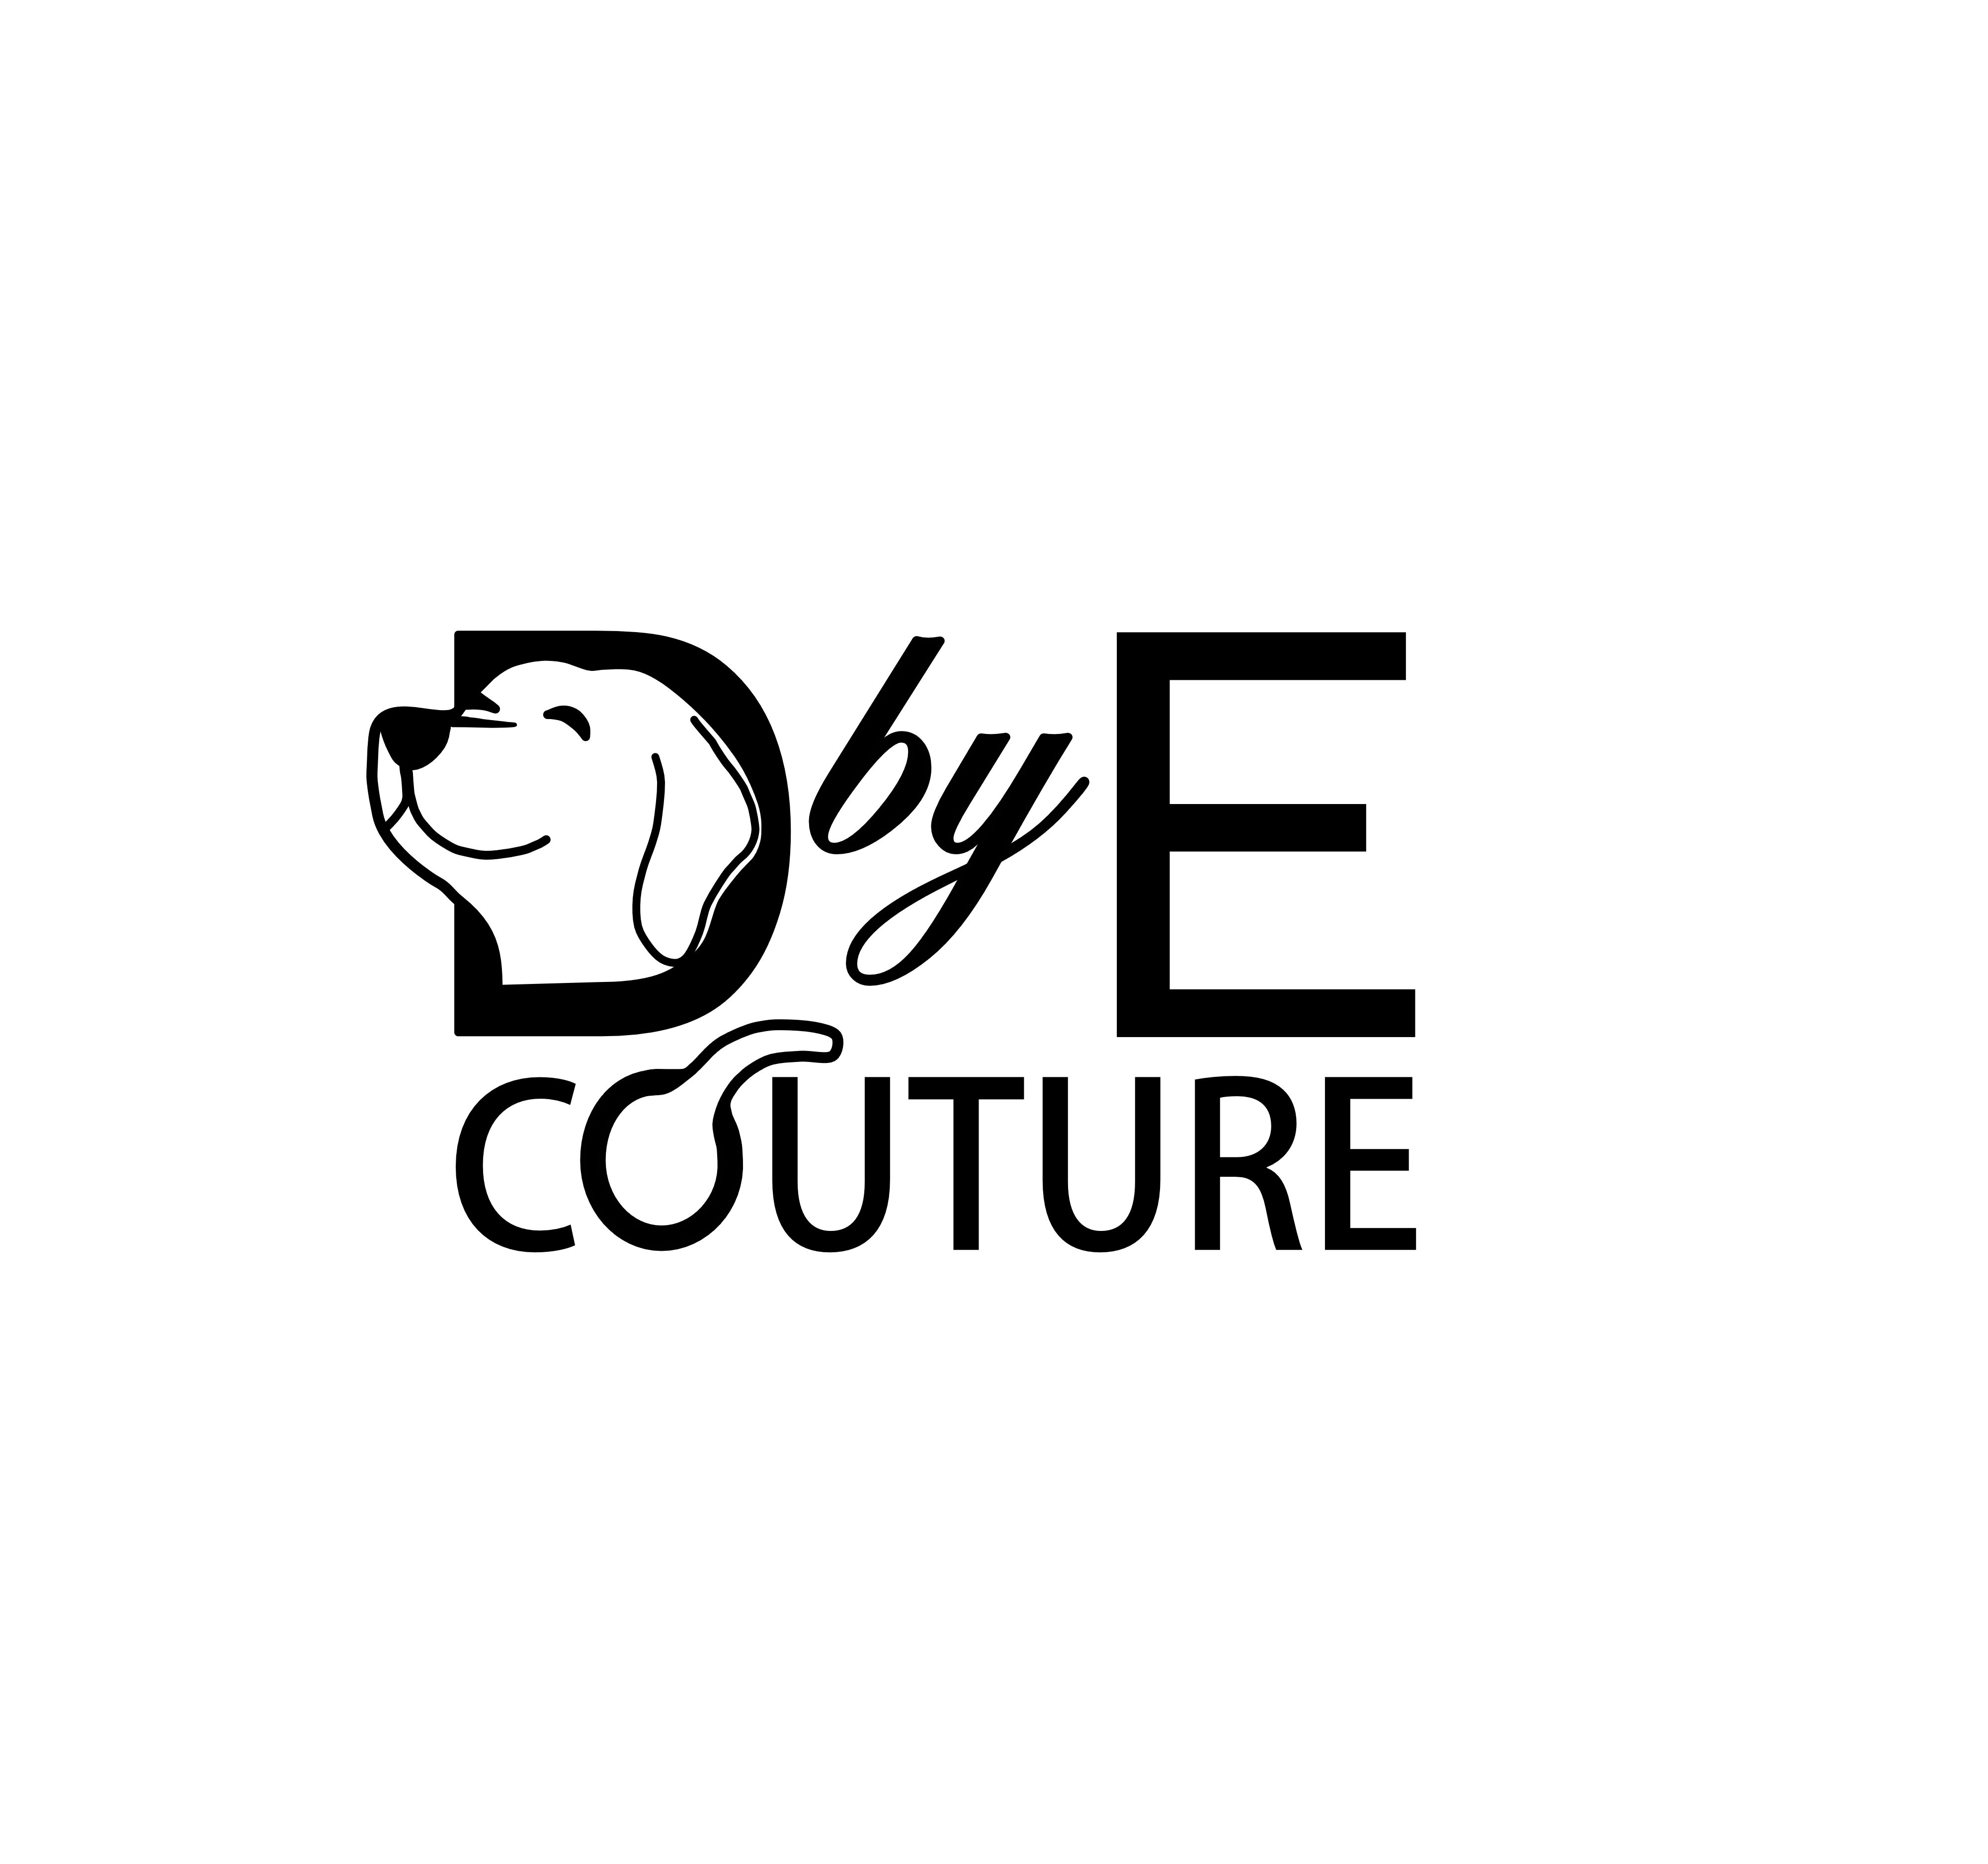 D by E Couture